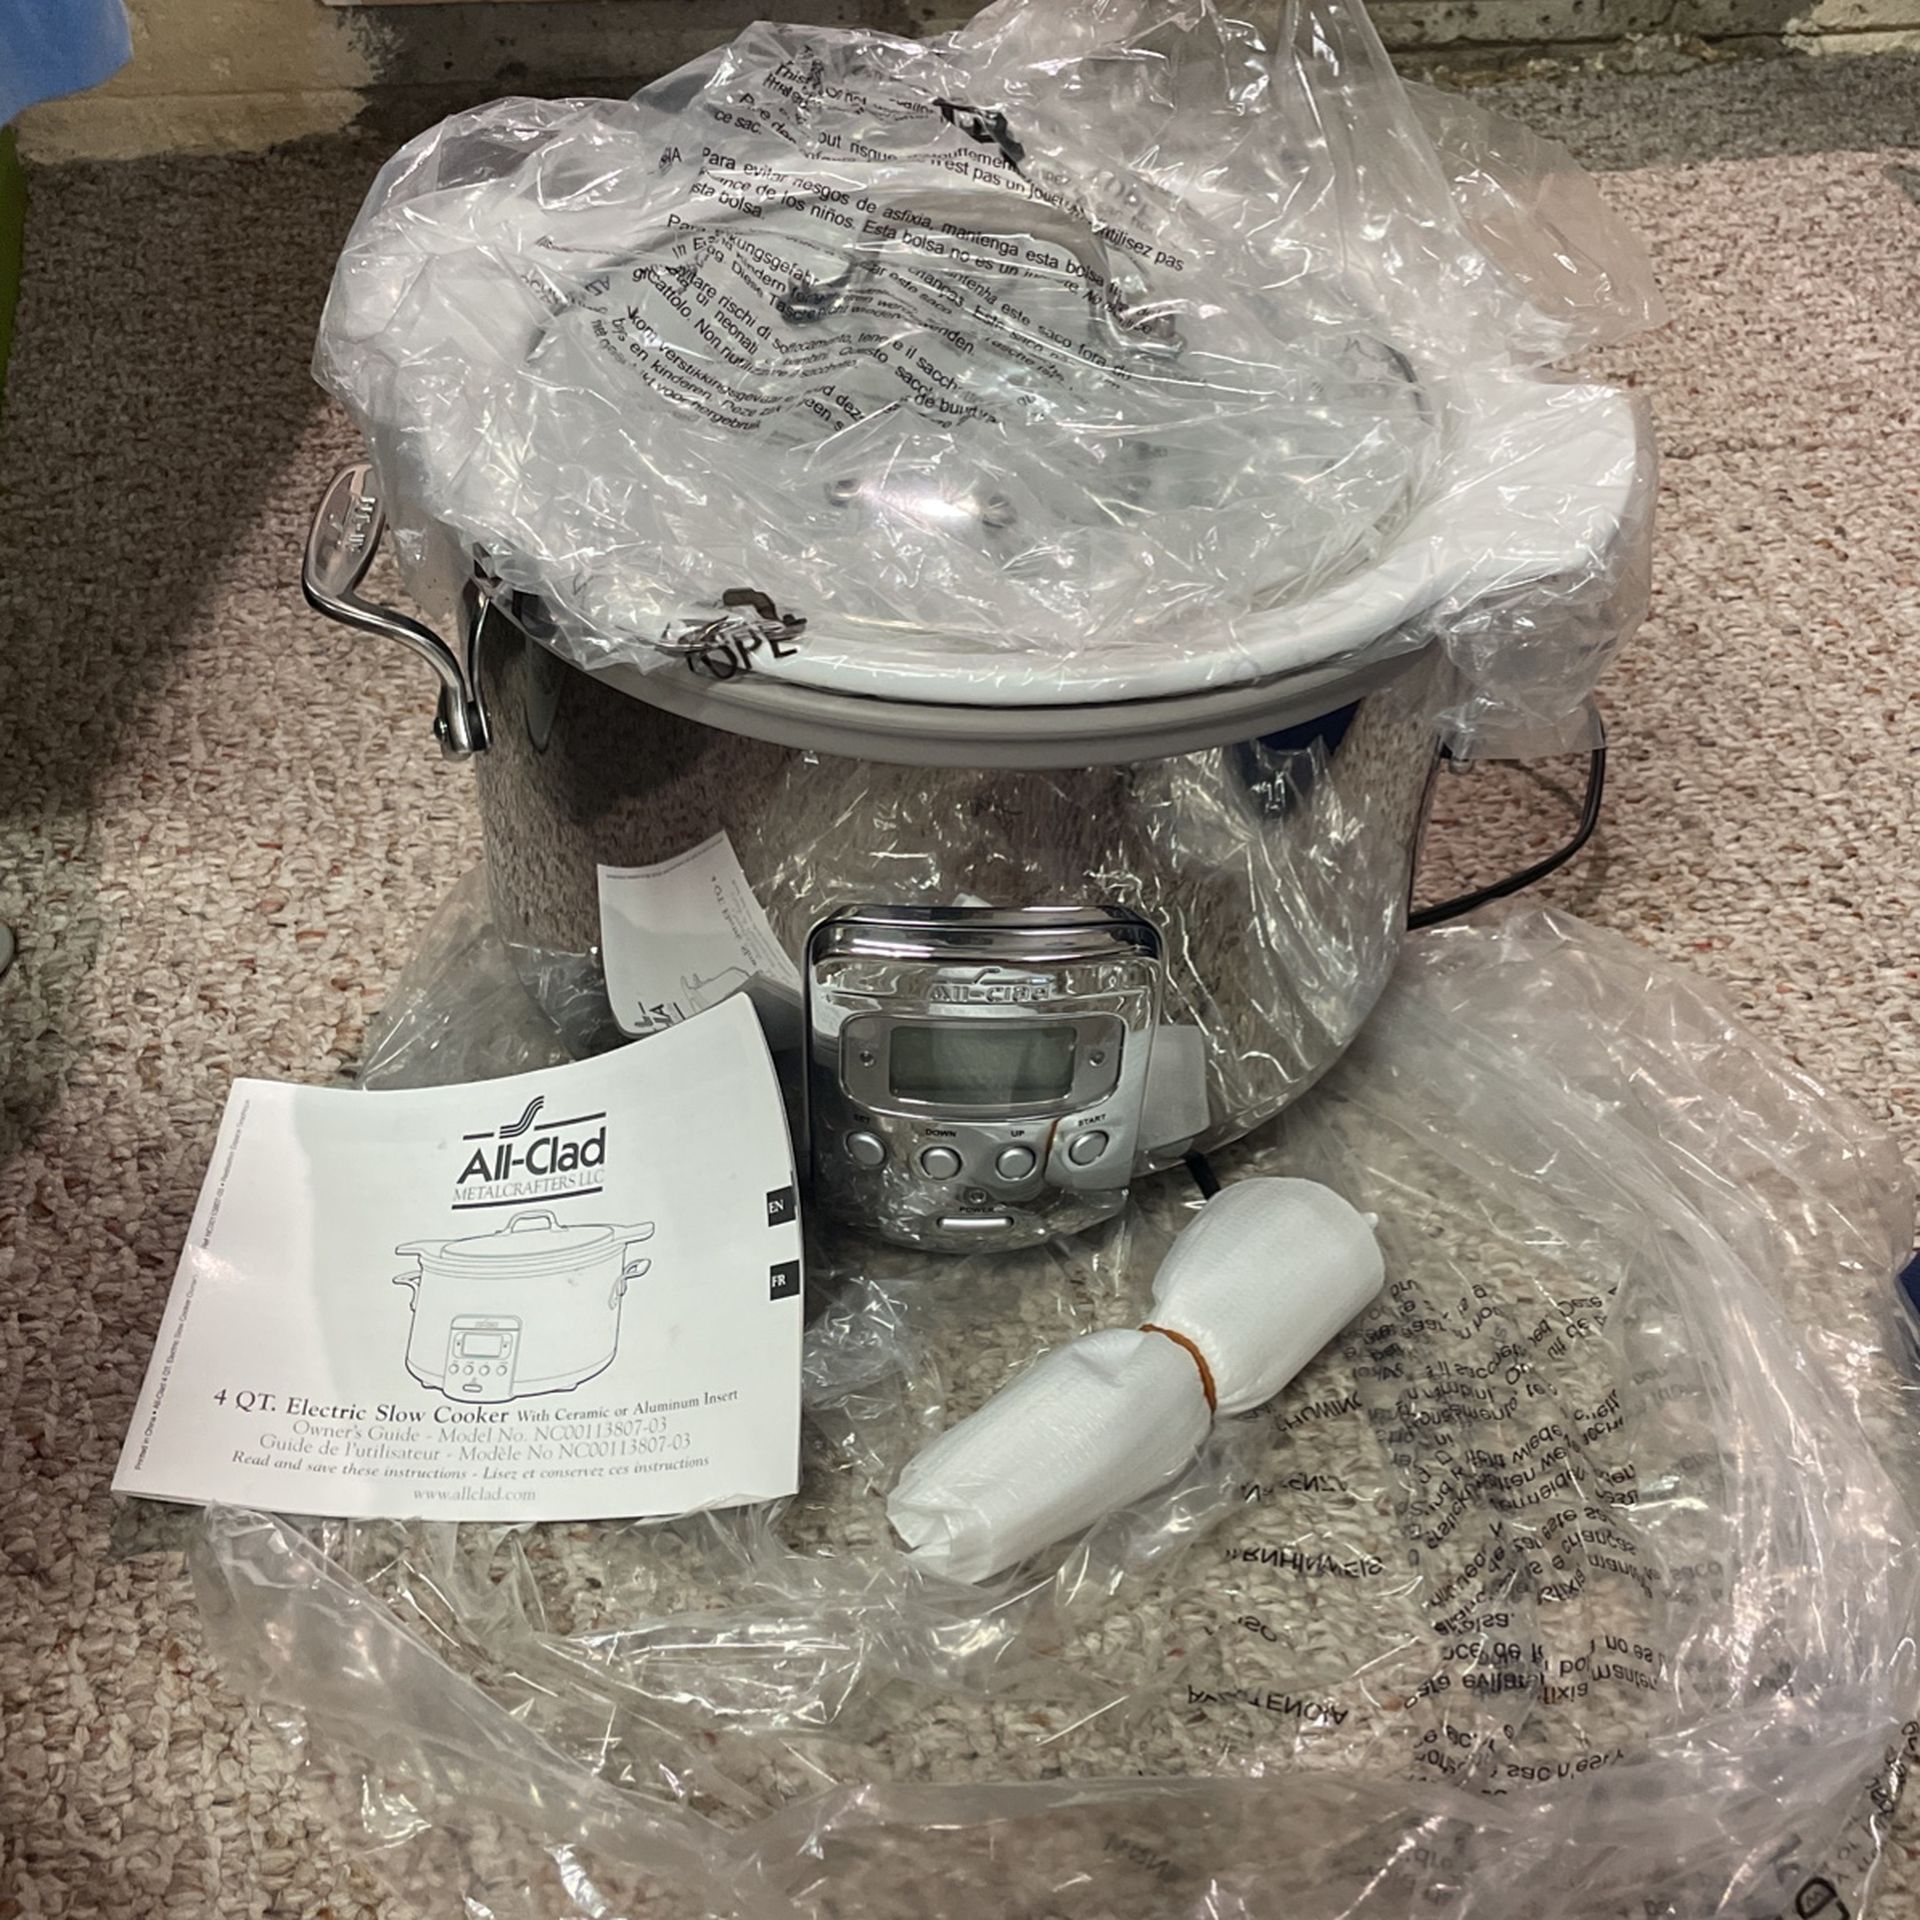 All-Clad Slow Cooker for Sale in North Caldwell, NJ - OfferUp